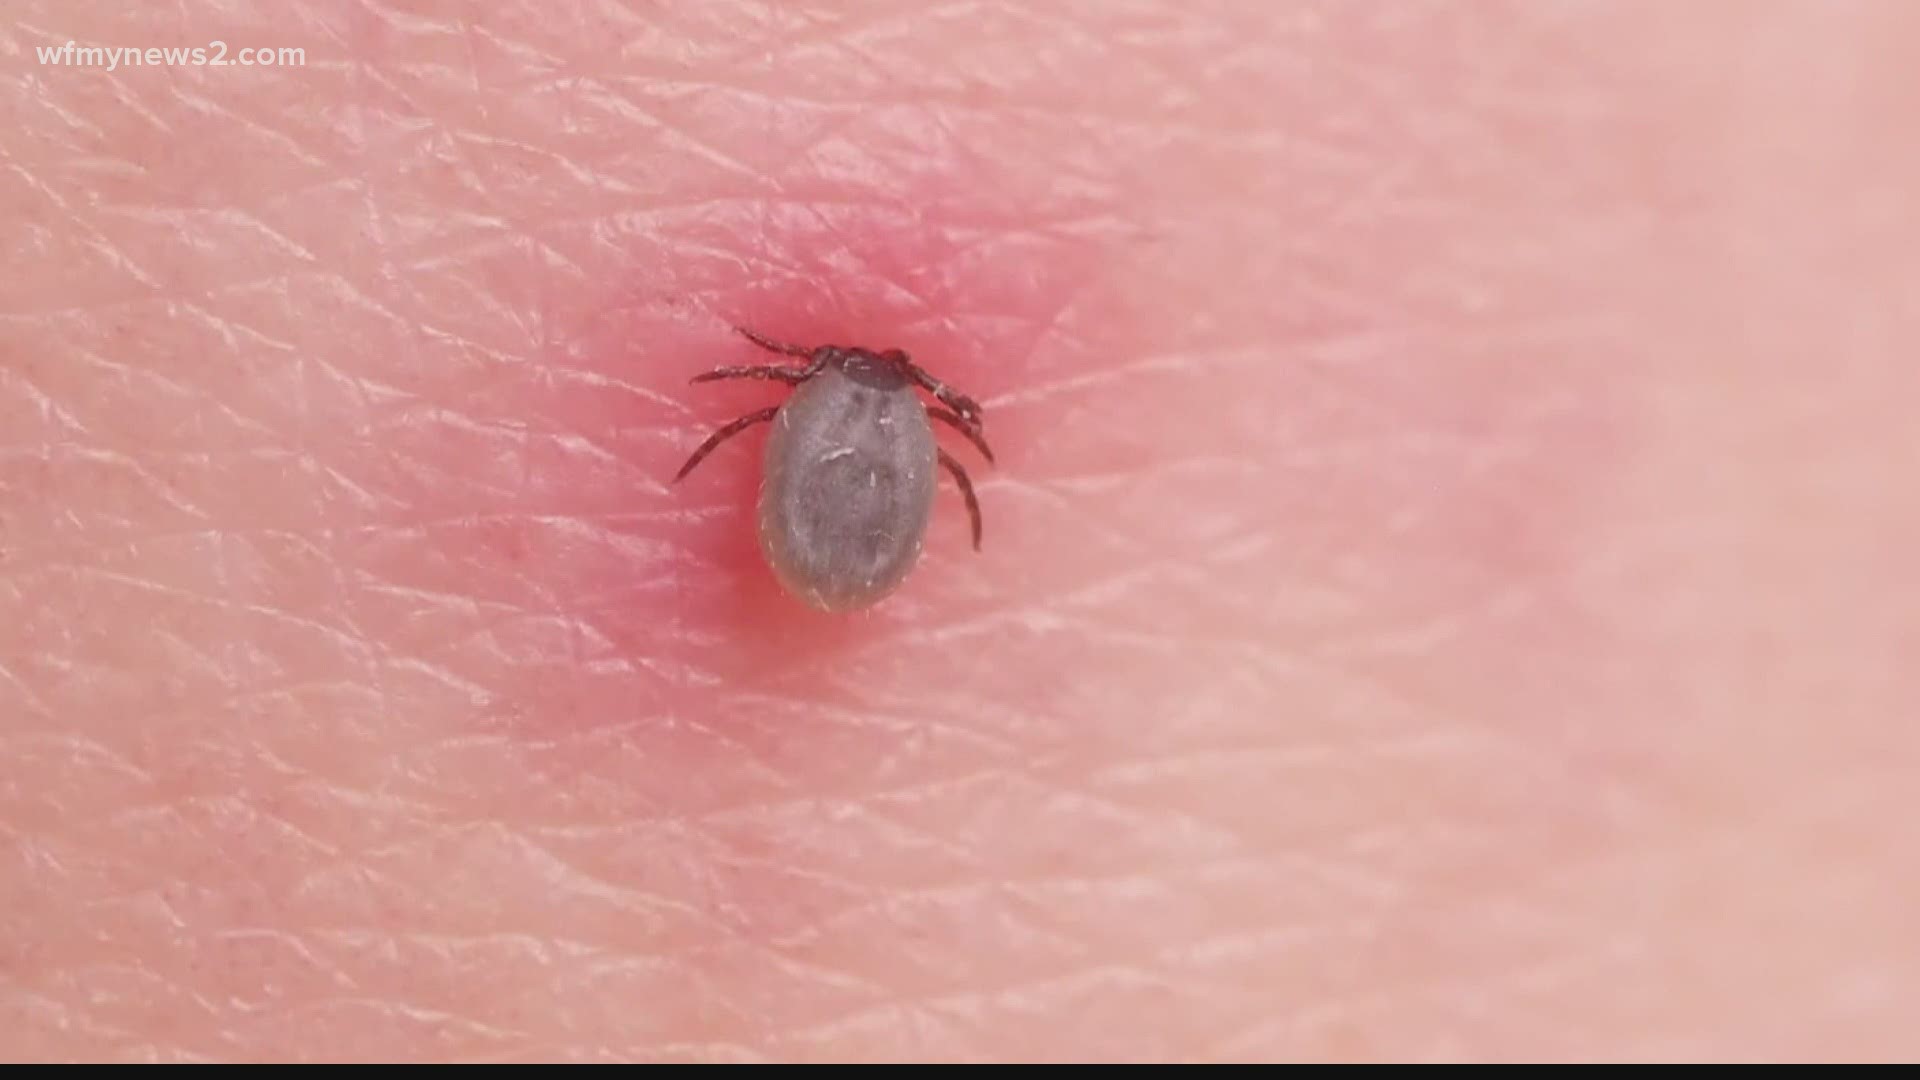 Ways to keep the ticks away: Wear long sleeves and pants, tuck your pants into your socks and wear insect repellent.